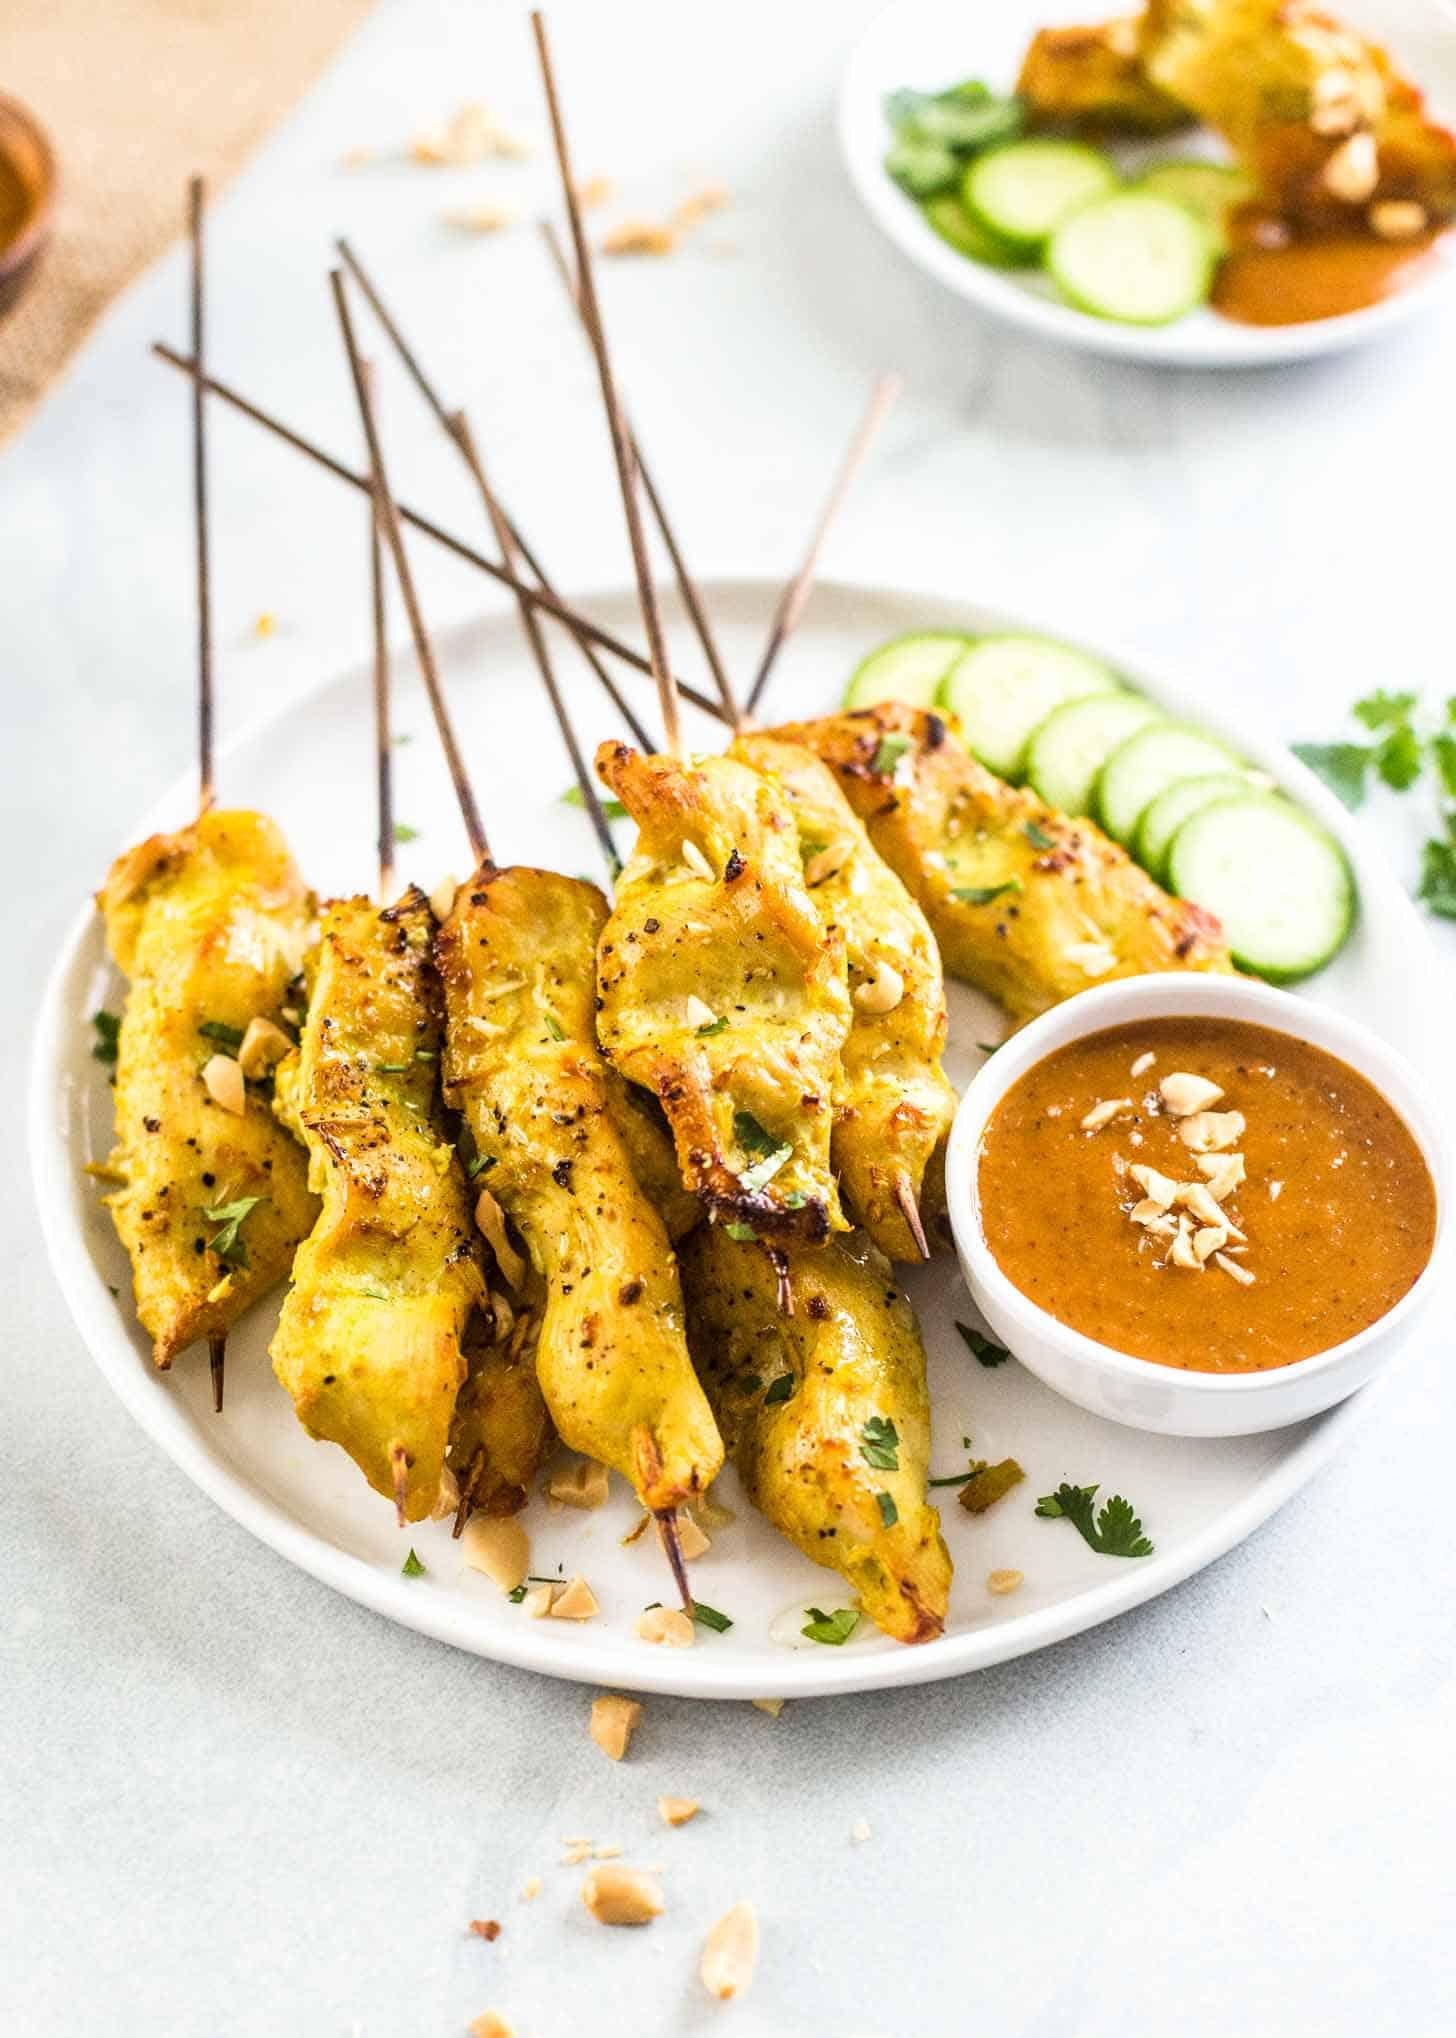 Flavor-packed Grilled Thai Chicken Skewers Recipe for Your Next BBQ Party